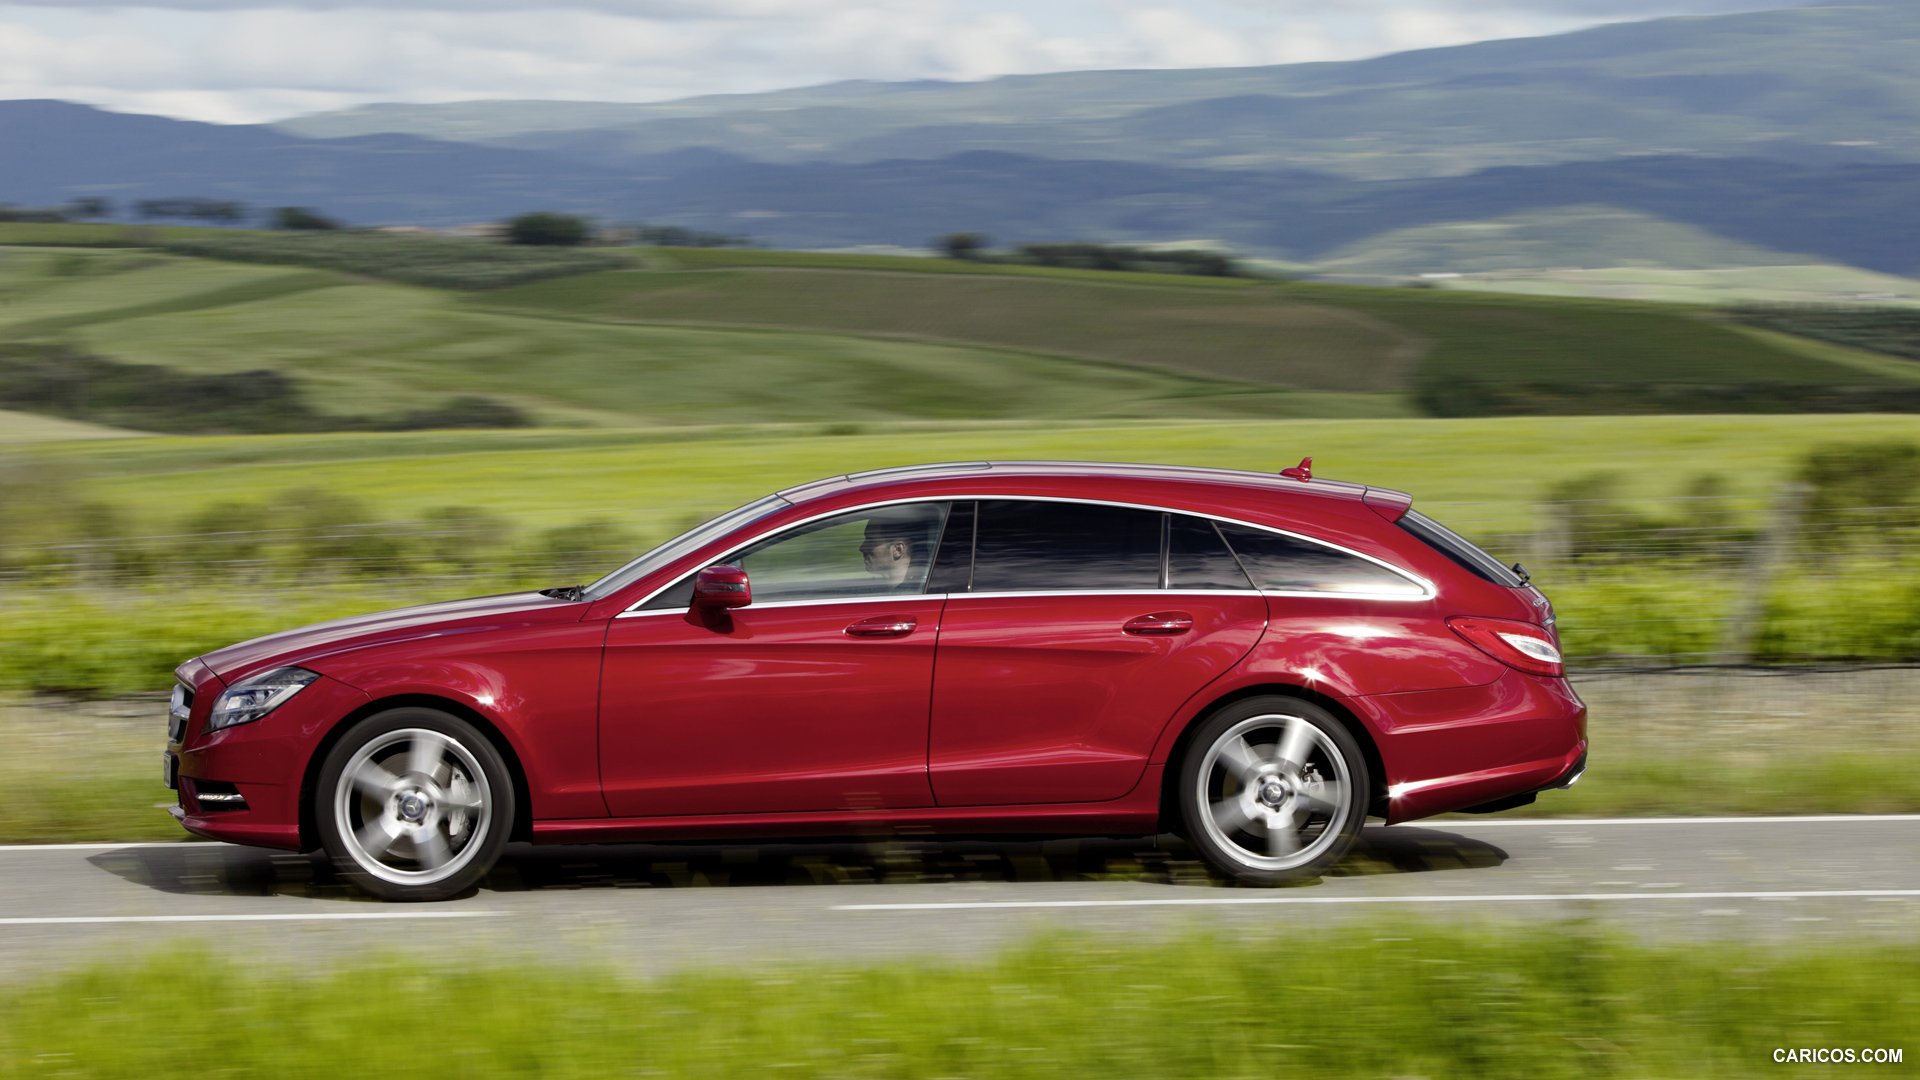 2013 Mercedes-Benz CLS 500 4MATIC Shooting Brake - Side, #7 of 184